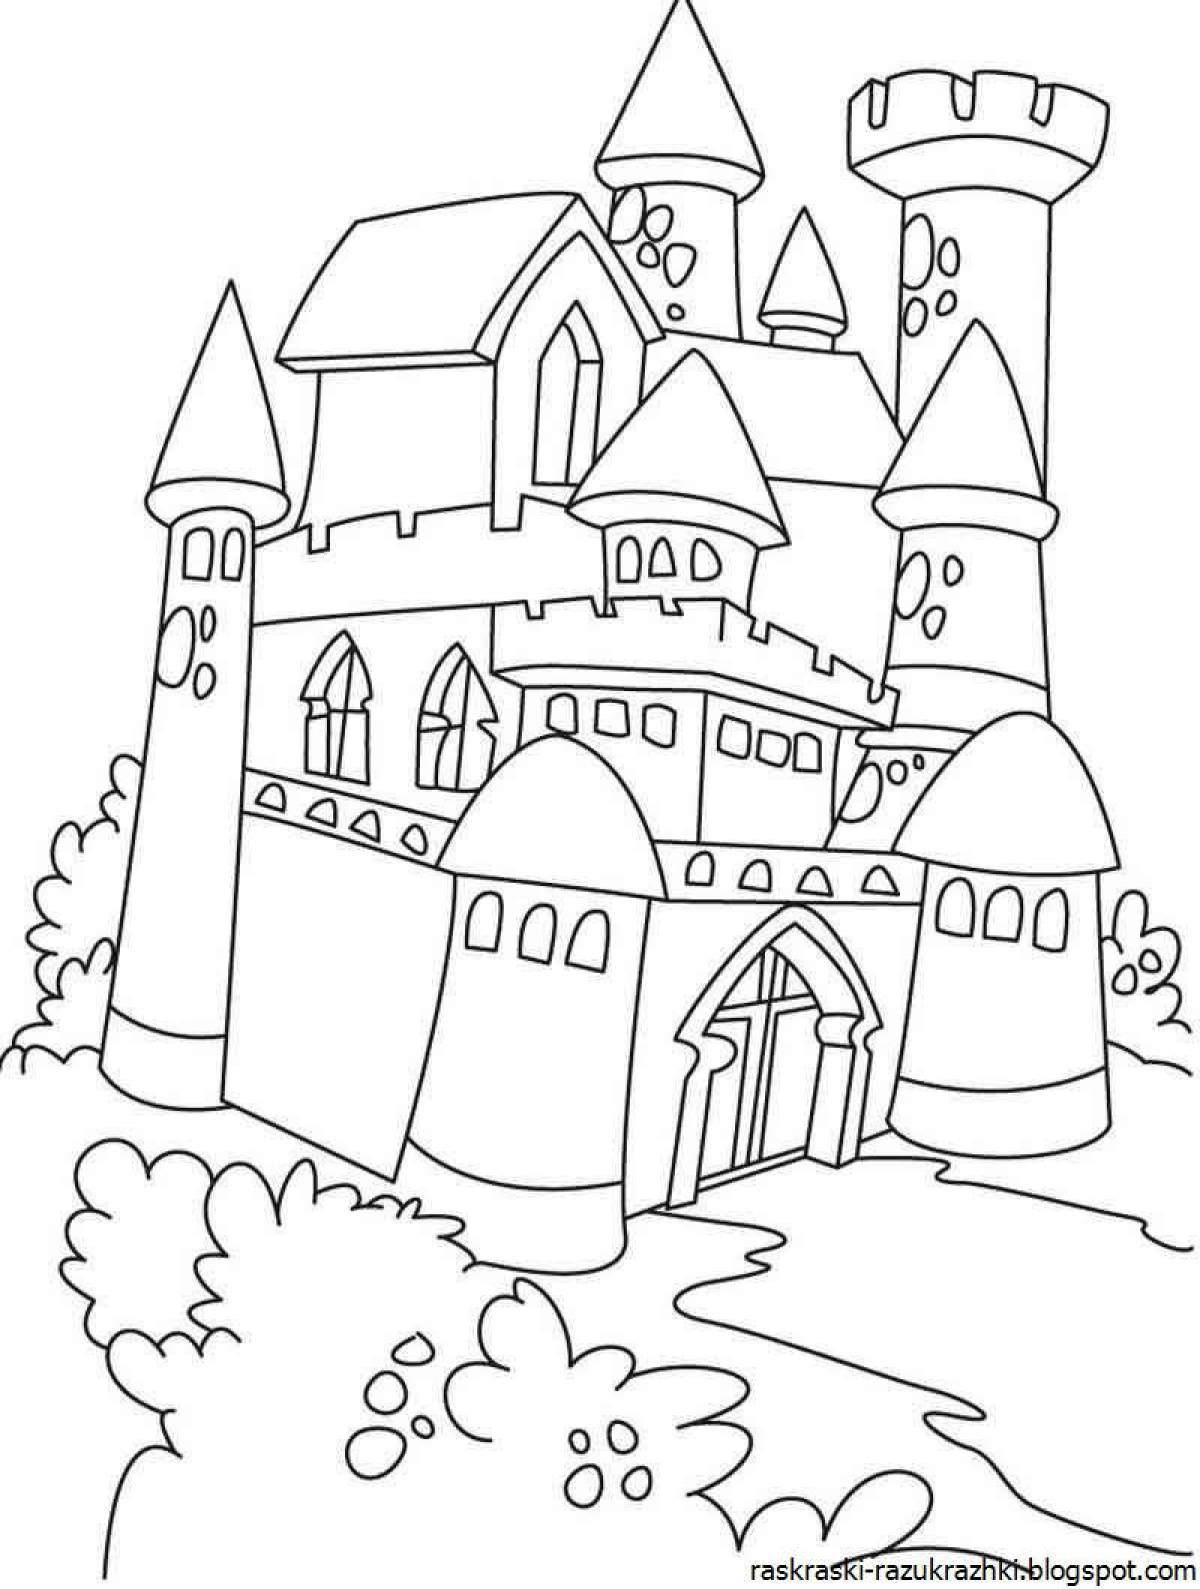 Coloring book phenomenal castle for kids